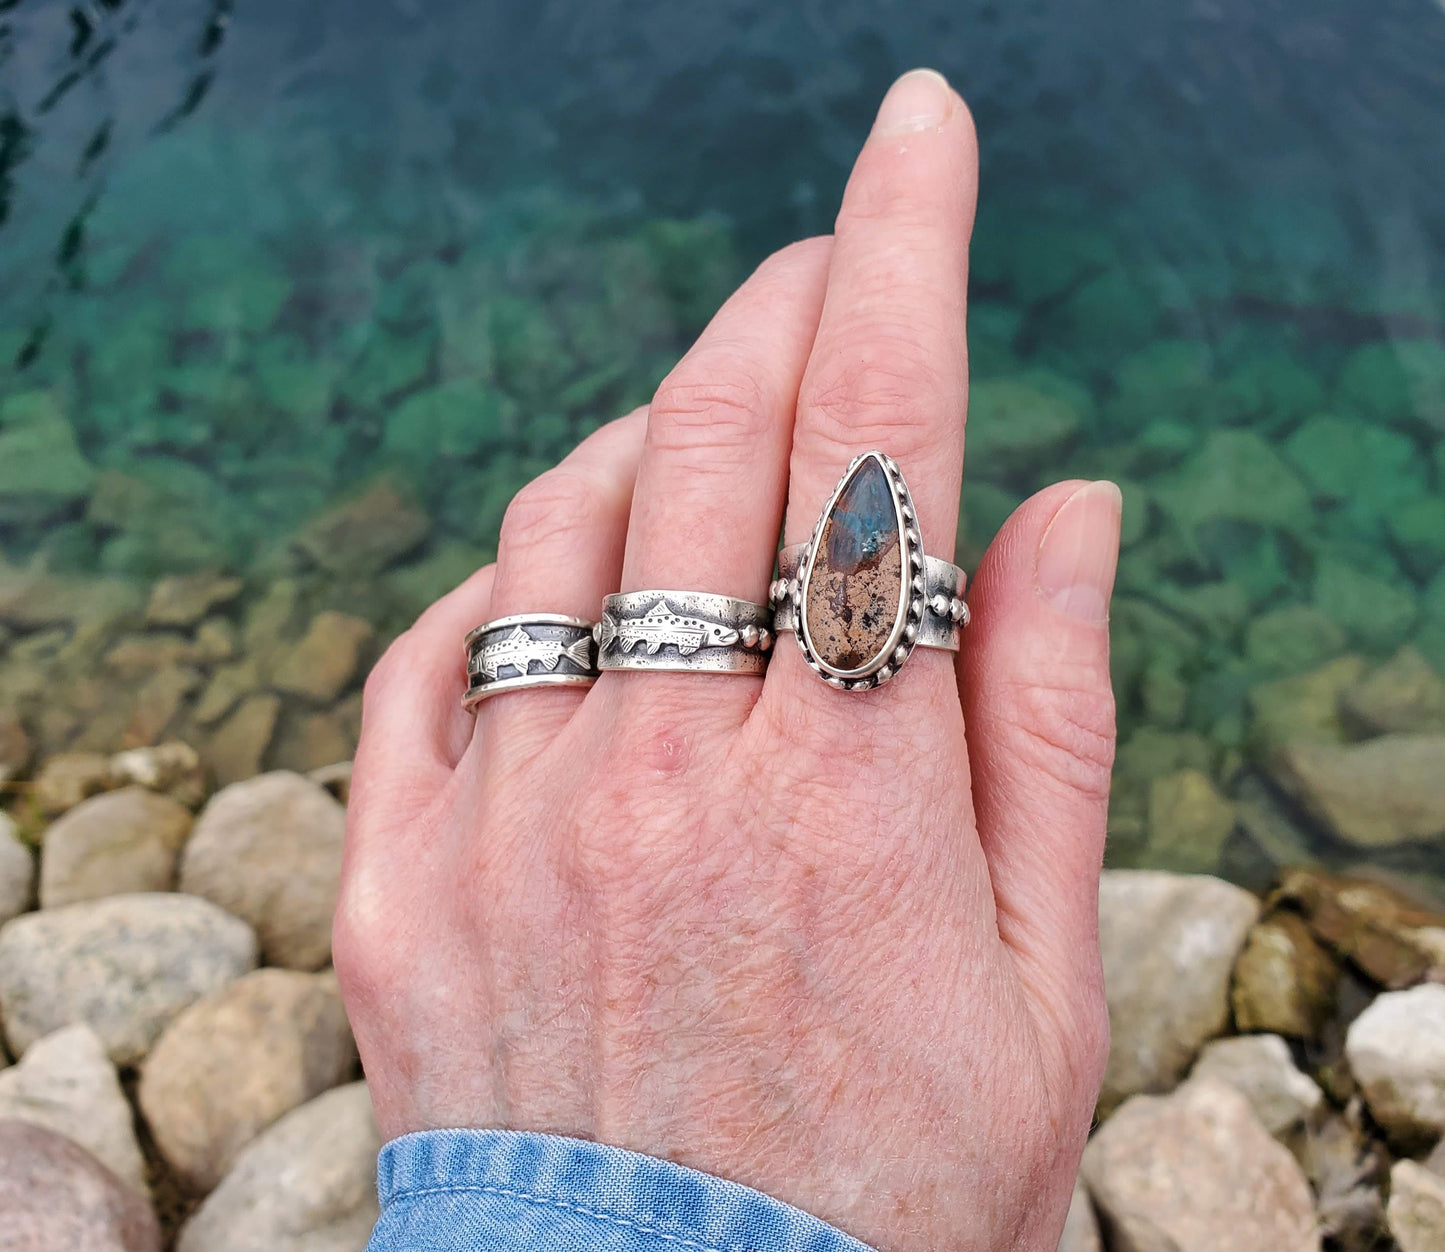 Needles Blue Agate Ring with Trout and River Rock Detailing - Size 8.25